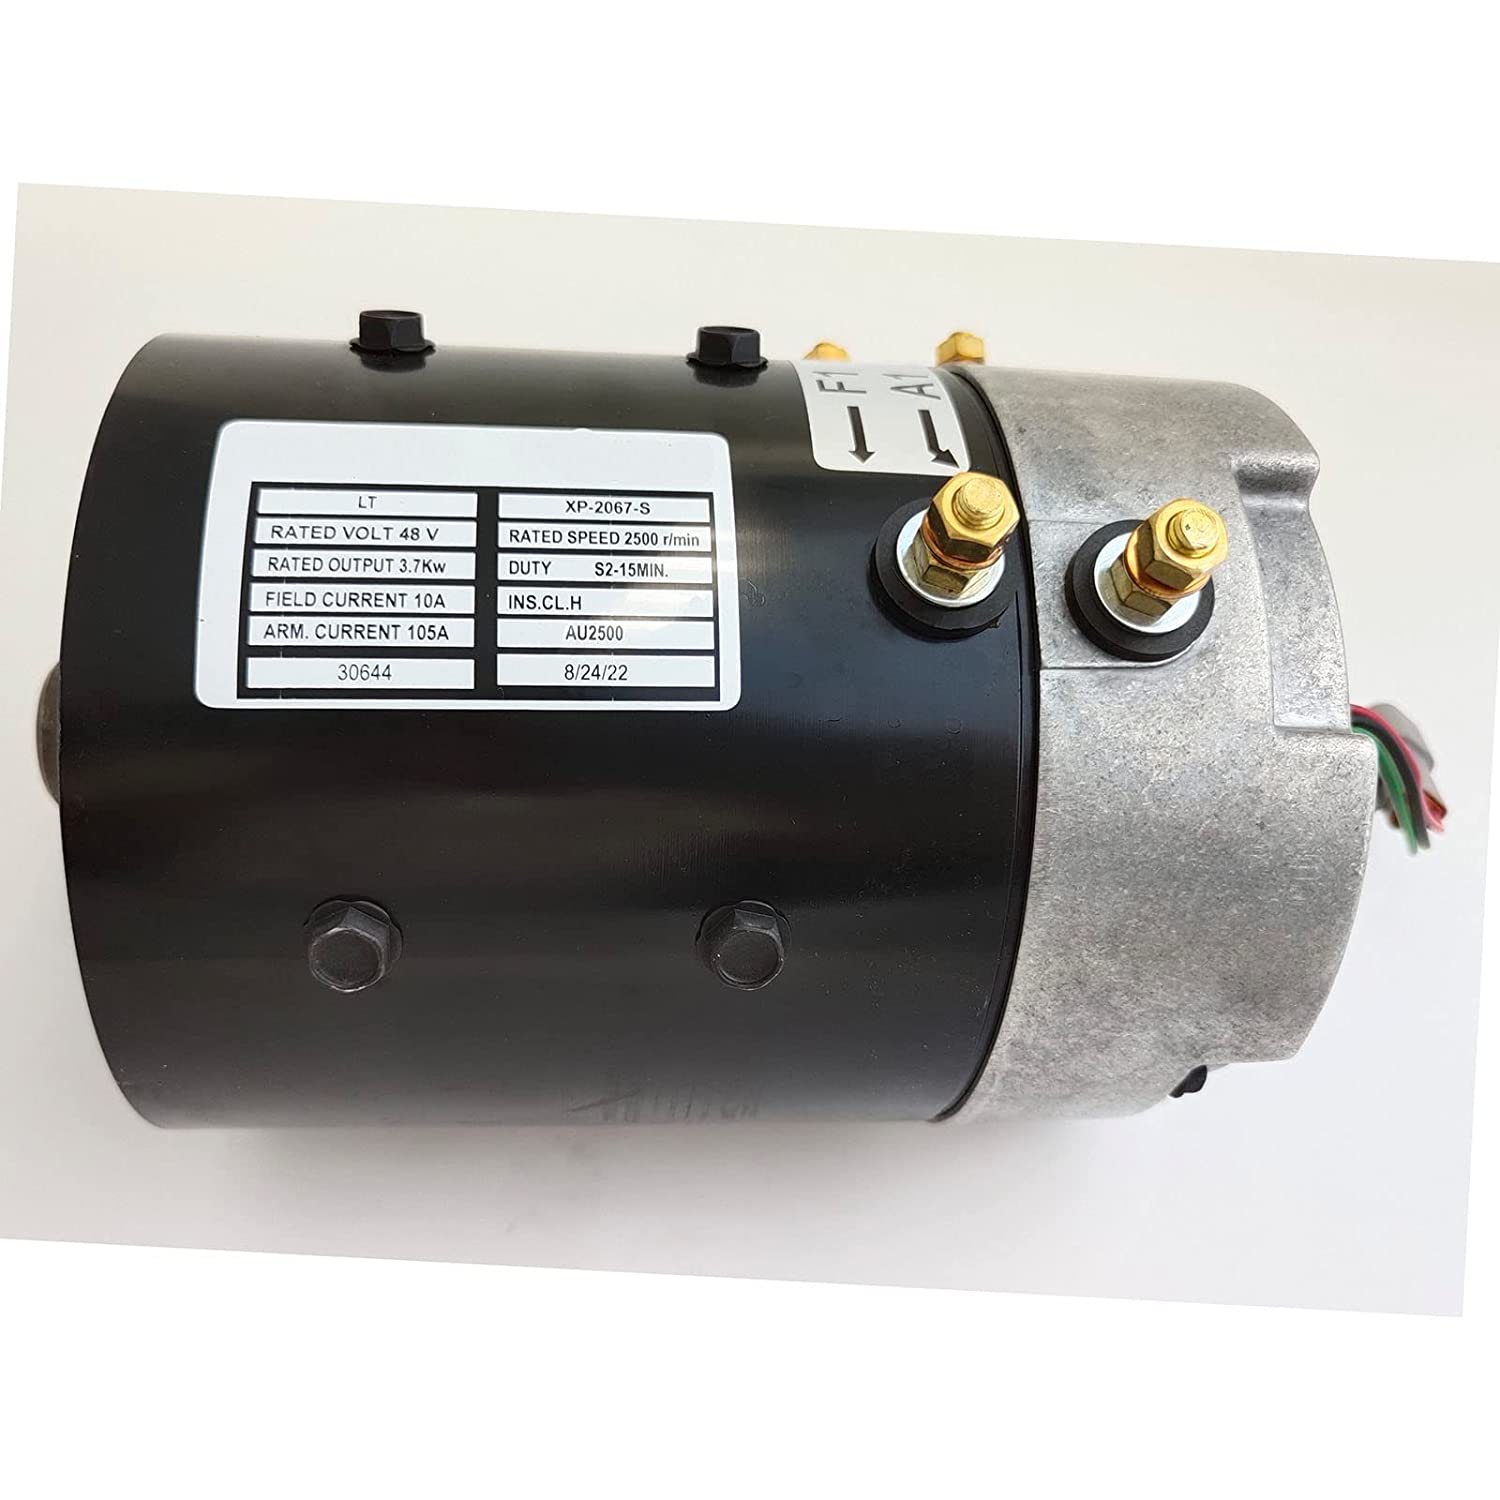 Seapple 48V DC XP-2067-S Electric Drive Motor Compatible with SepEx Motor ZQS48-3.7-T-GN 103572501 1035725-01 102240102 3.7 kW Electric Vehicle Club Car Golf Cart - image 3 of 6